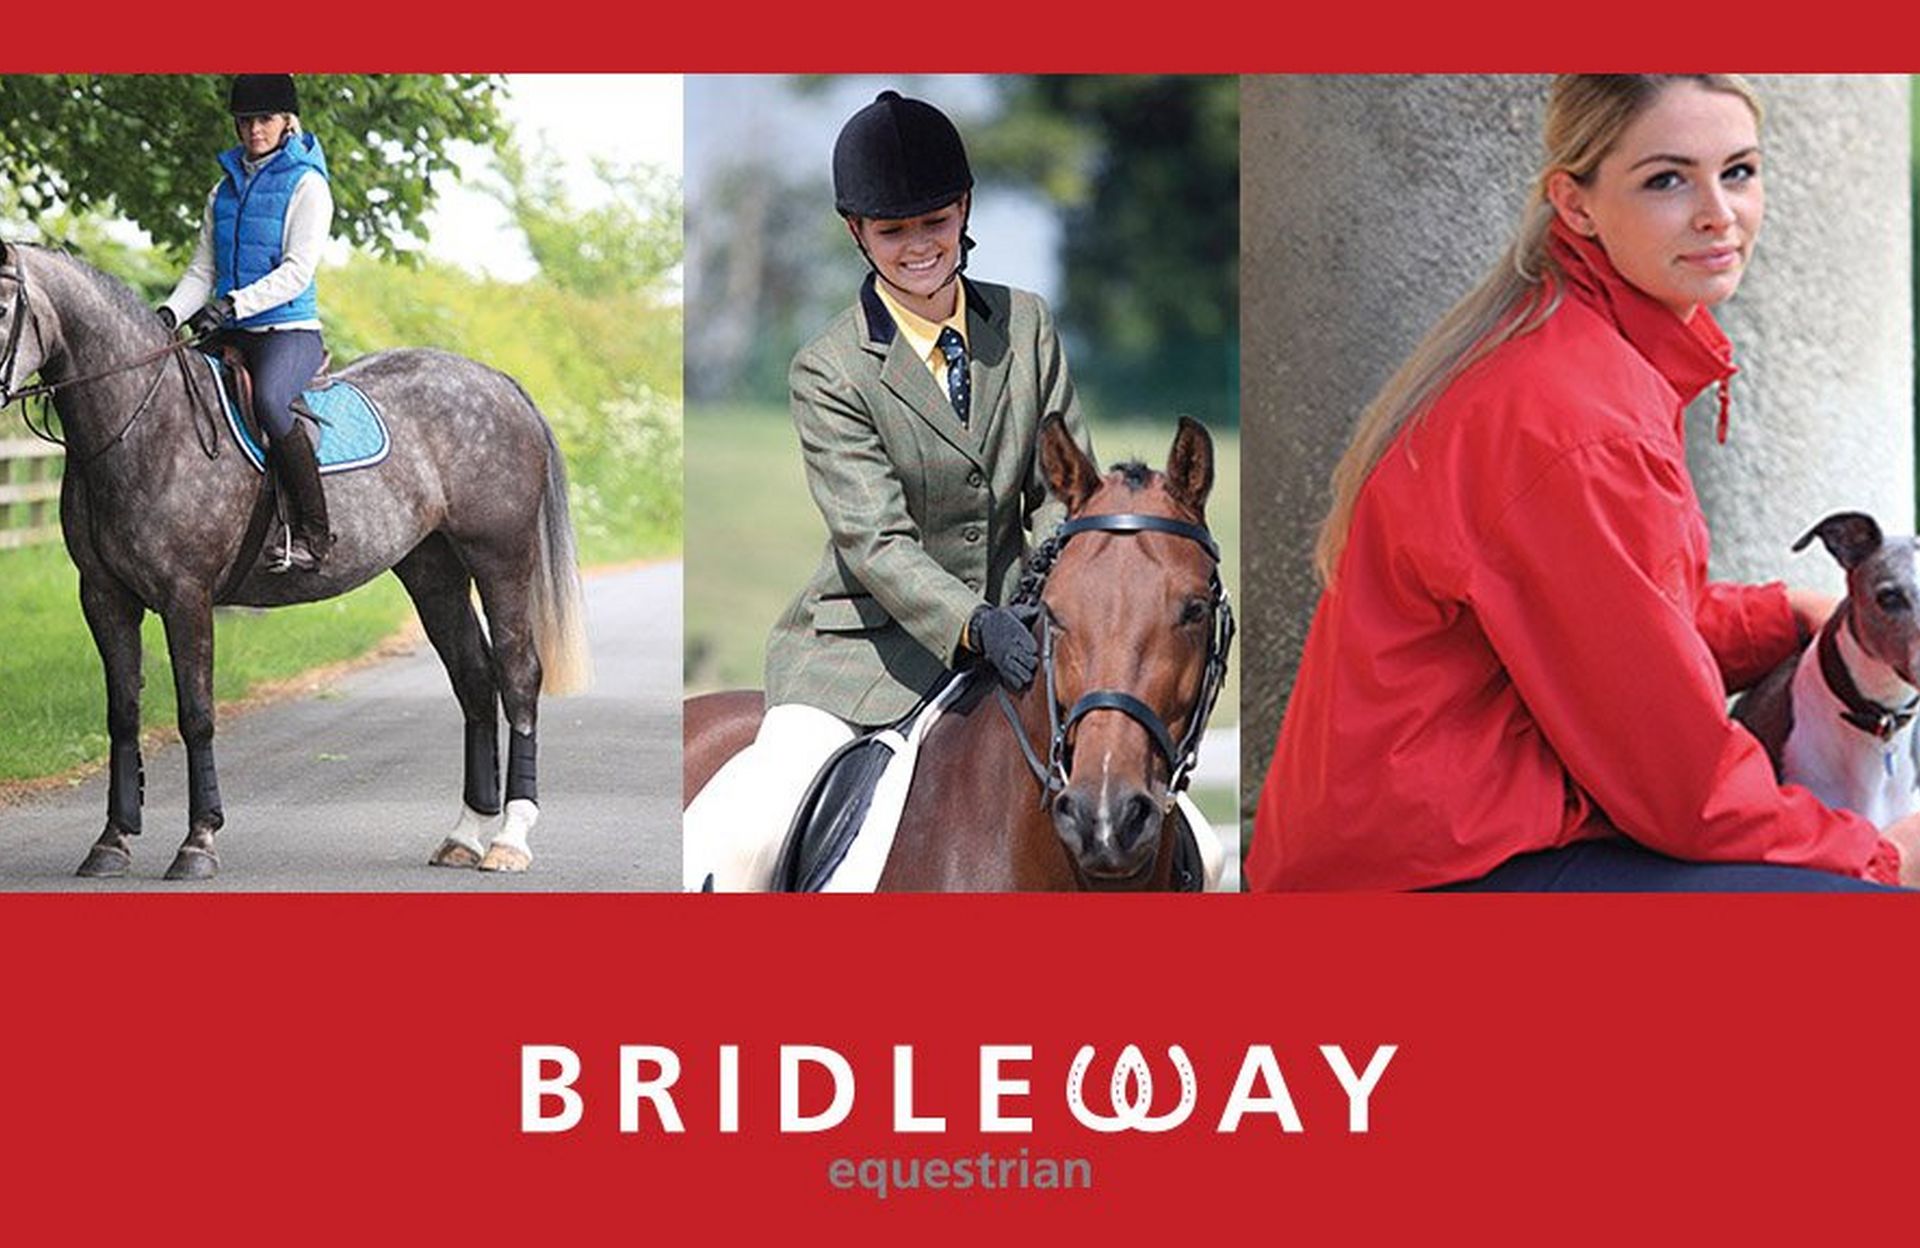 Bridleway Equestrian – New Brand to Naylors